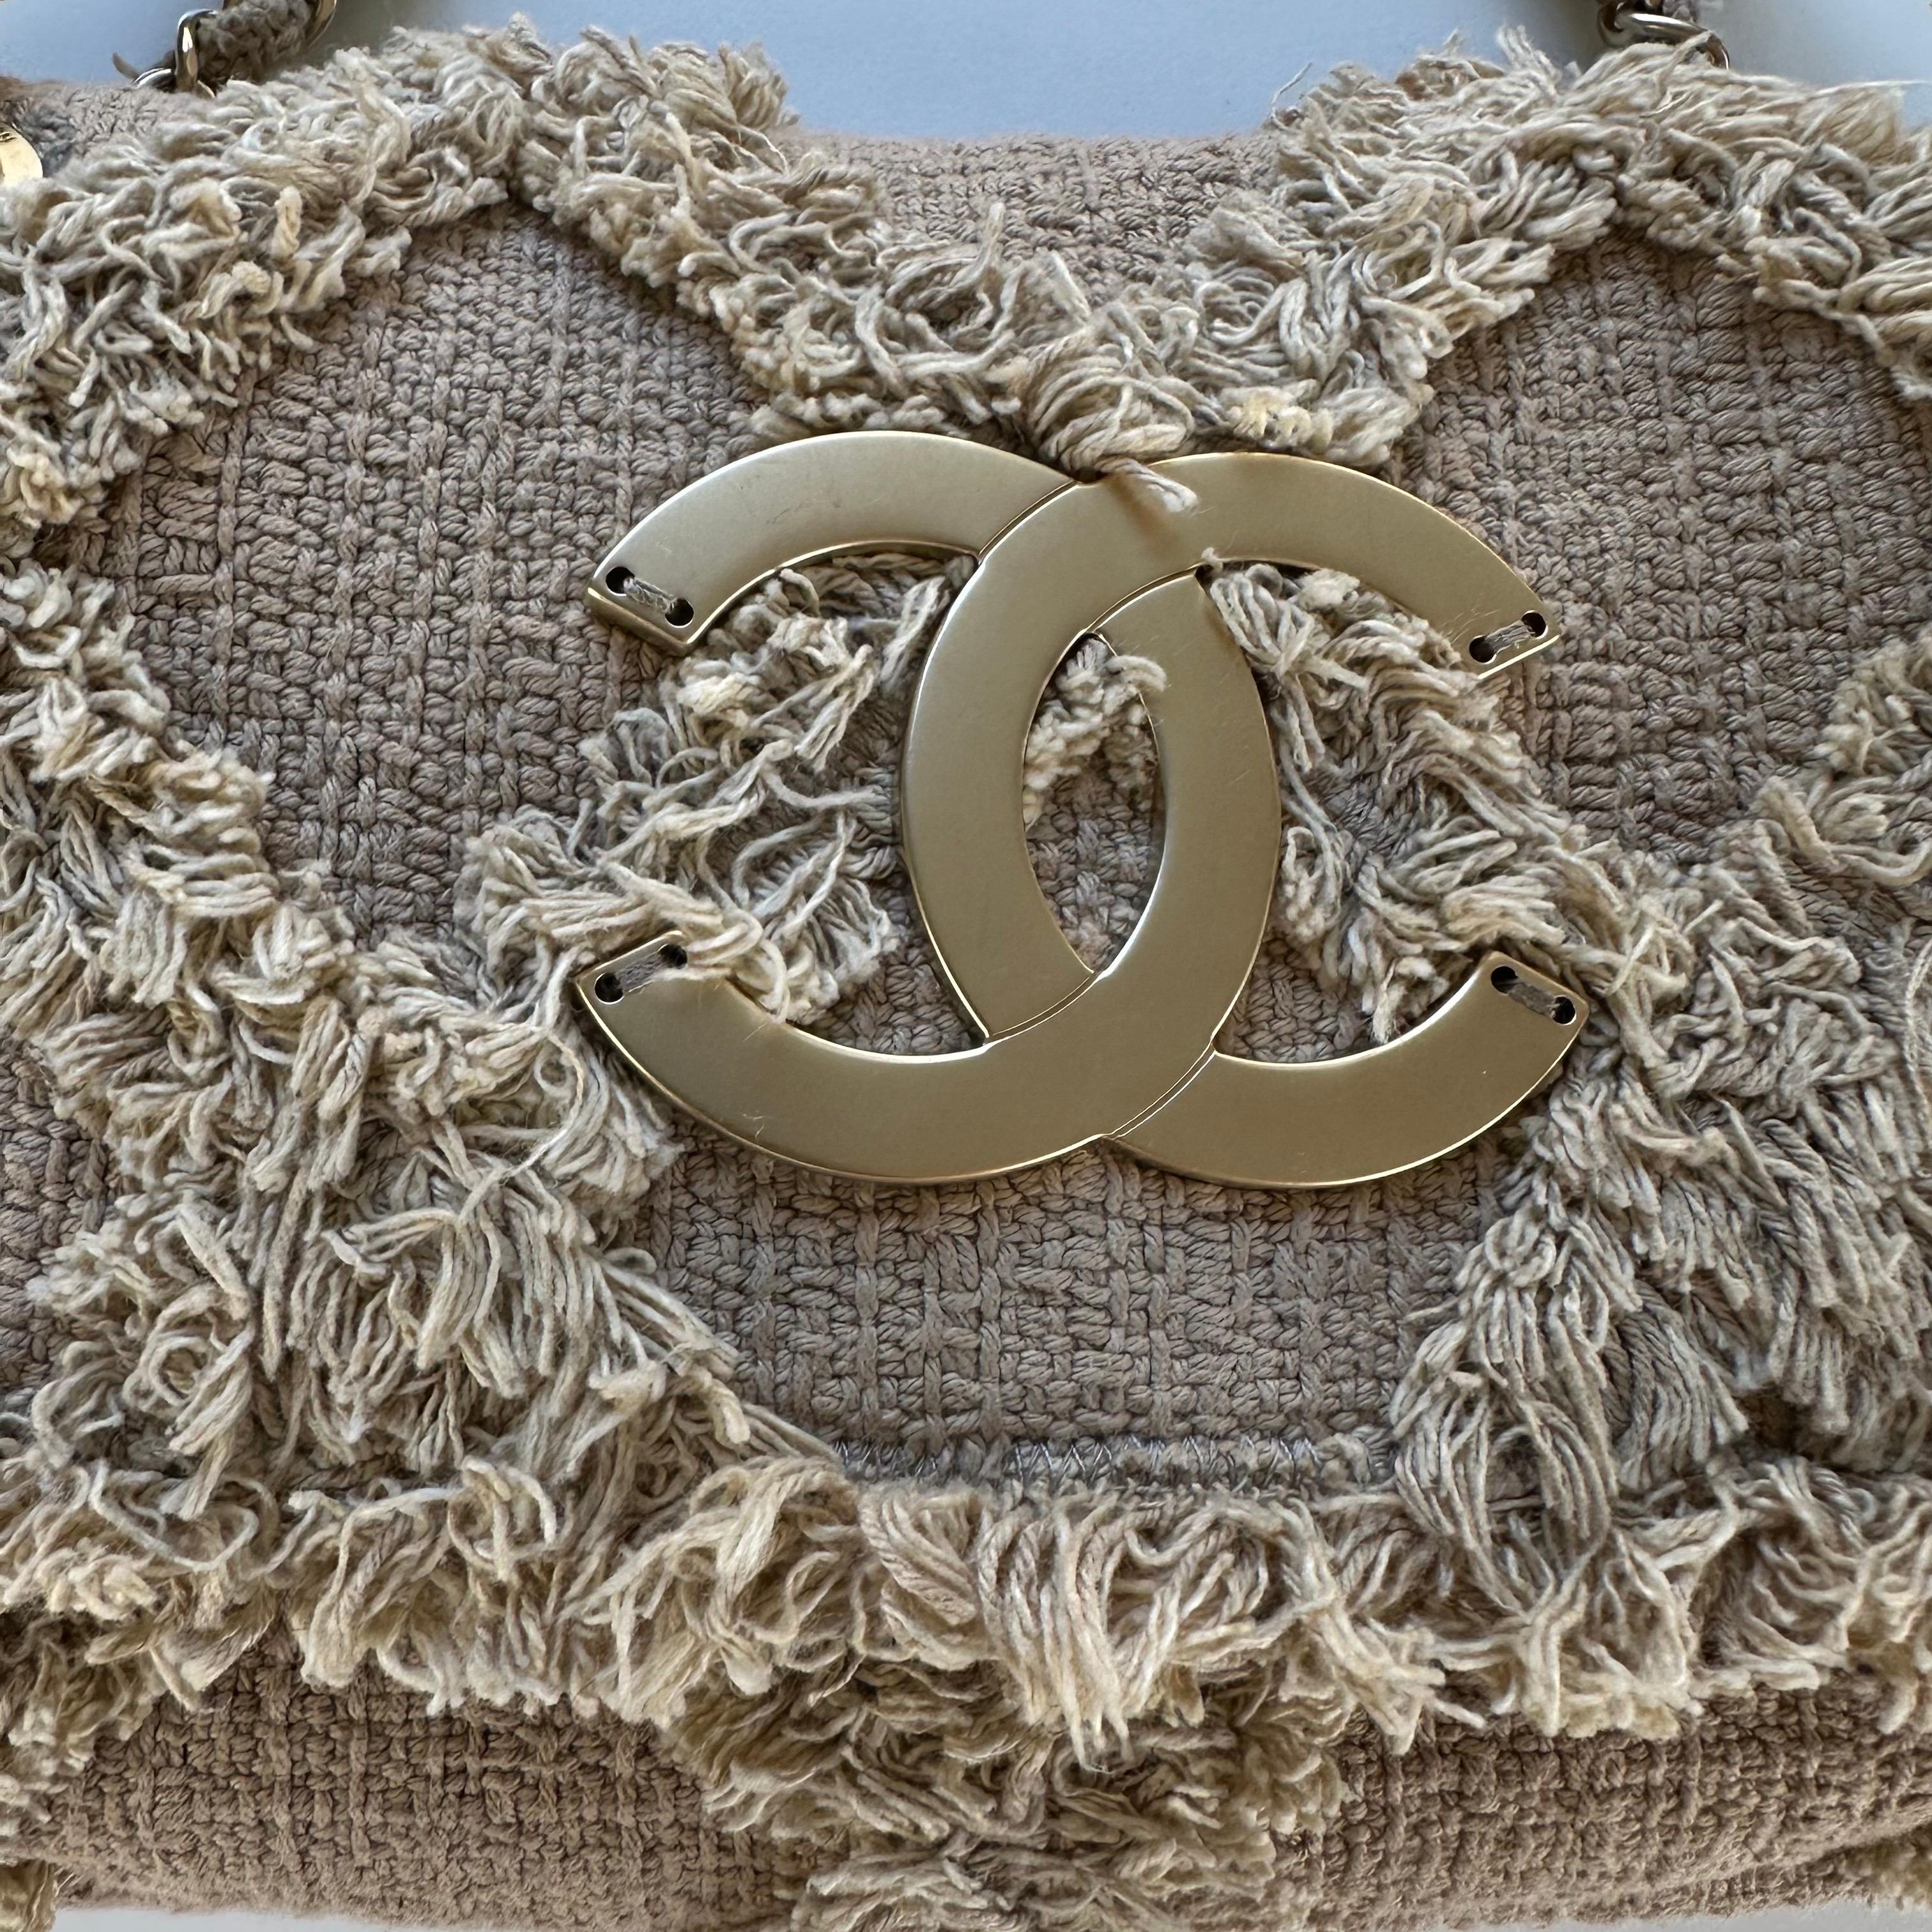 Chanel 2009 Small Sized Beige Tweed Fringe Organic Crochet Nature Flap Bag For Sale 7